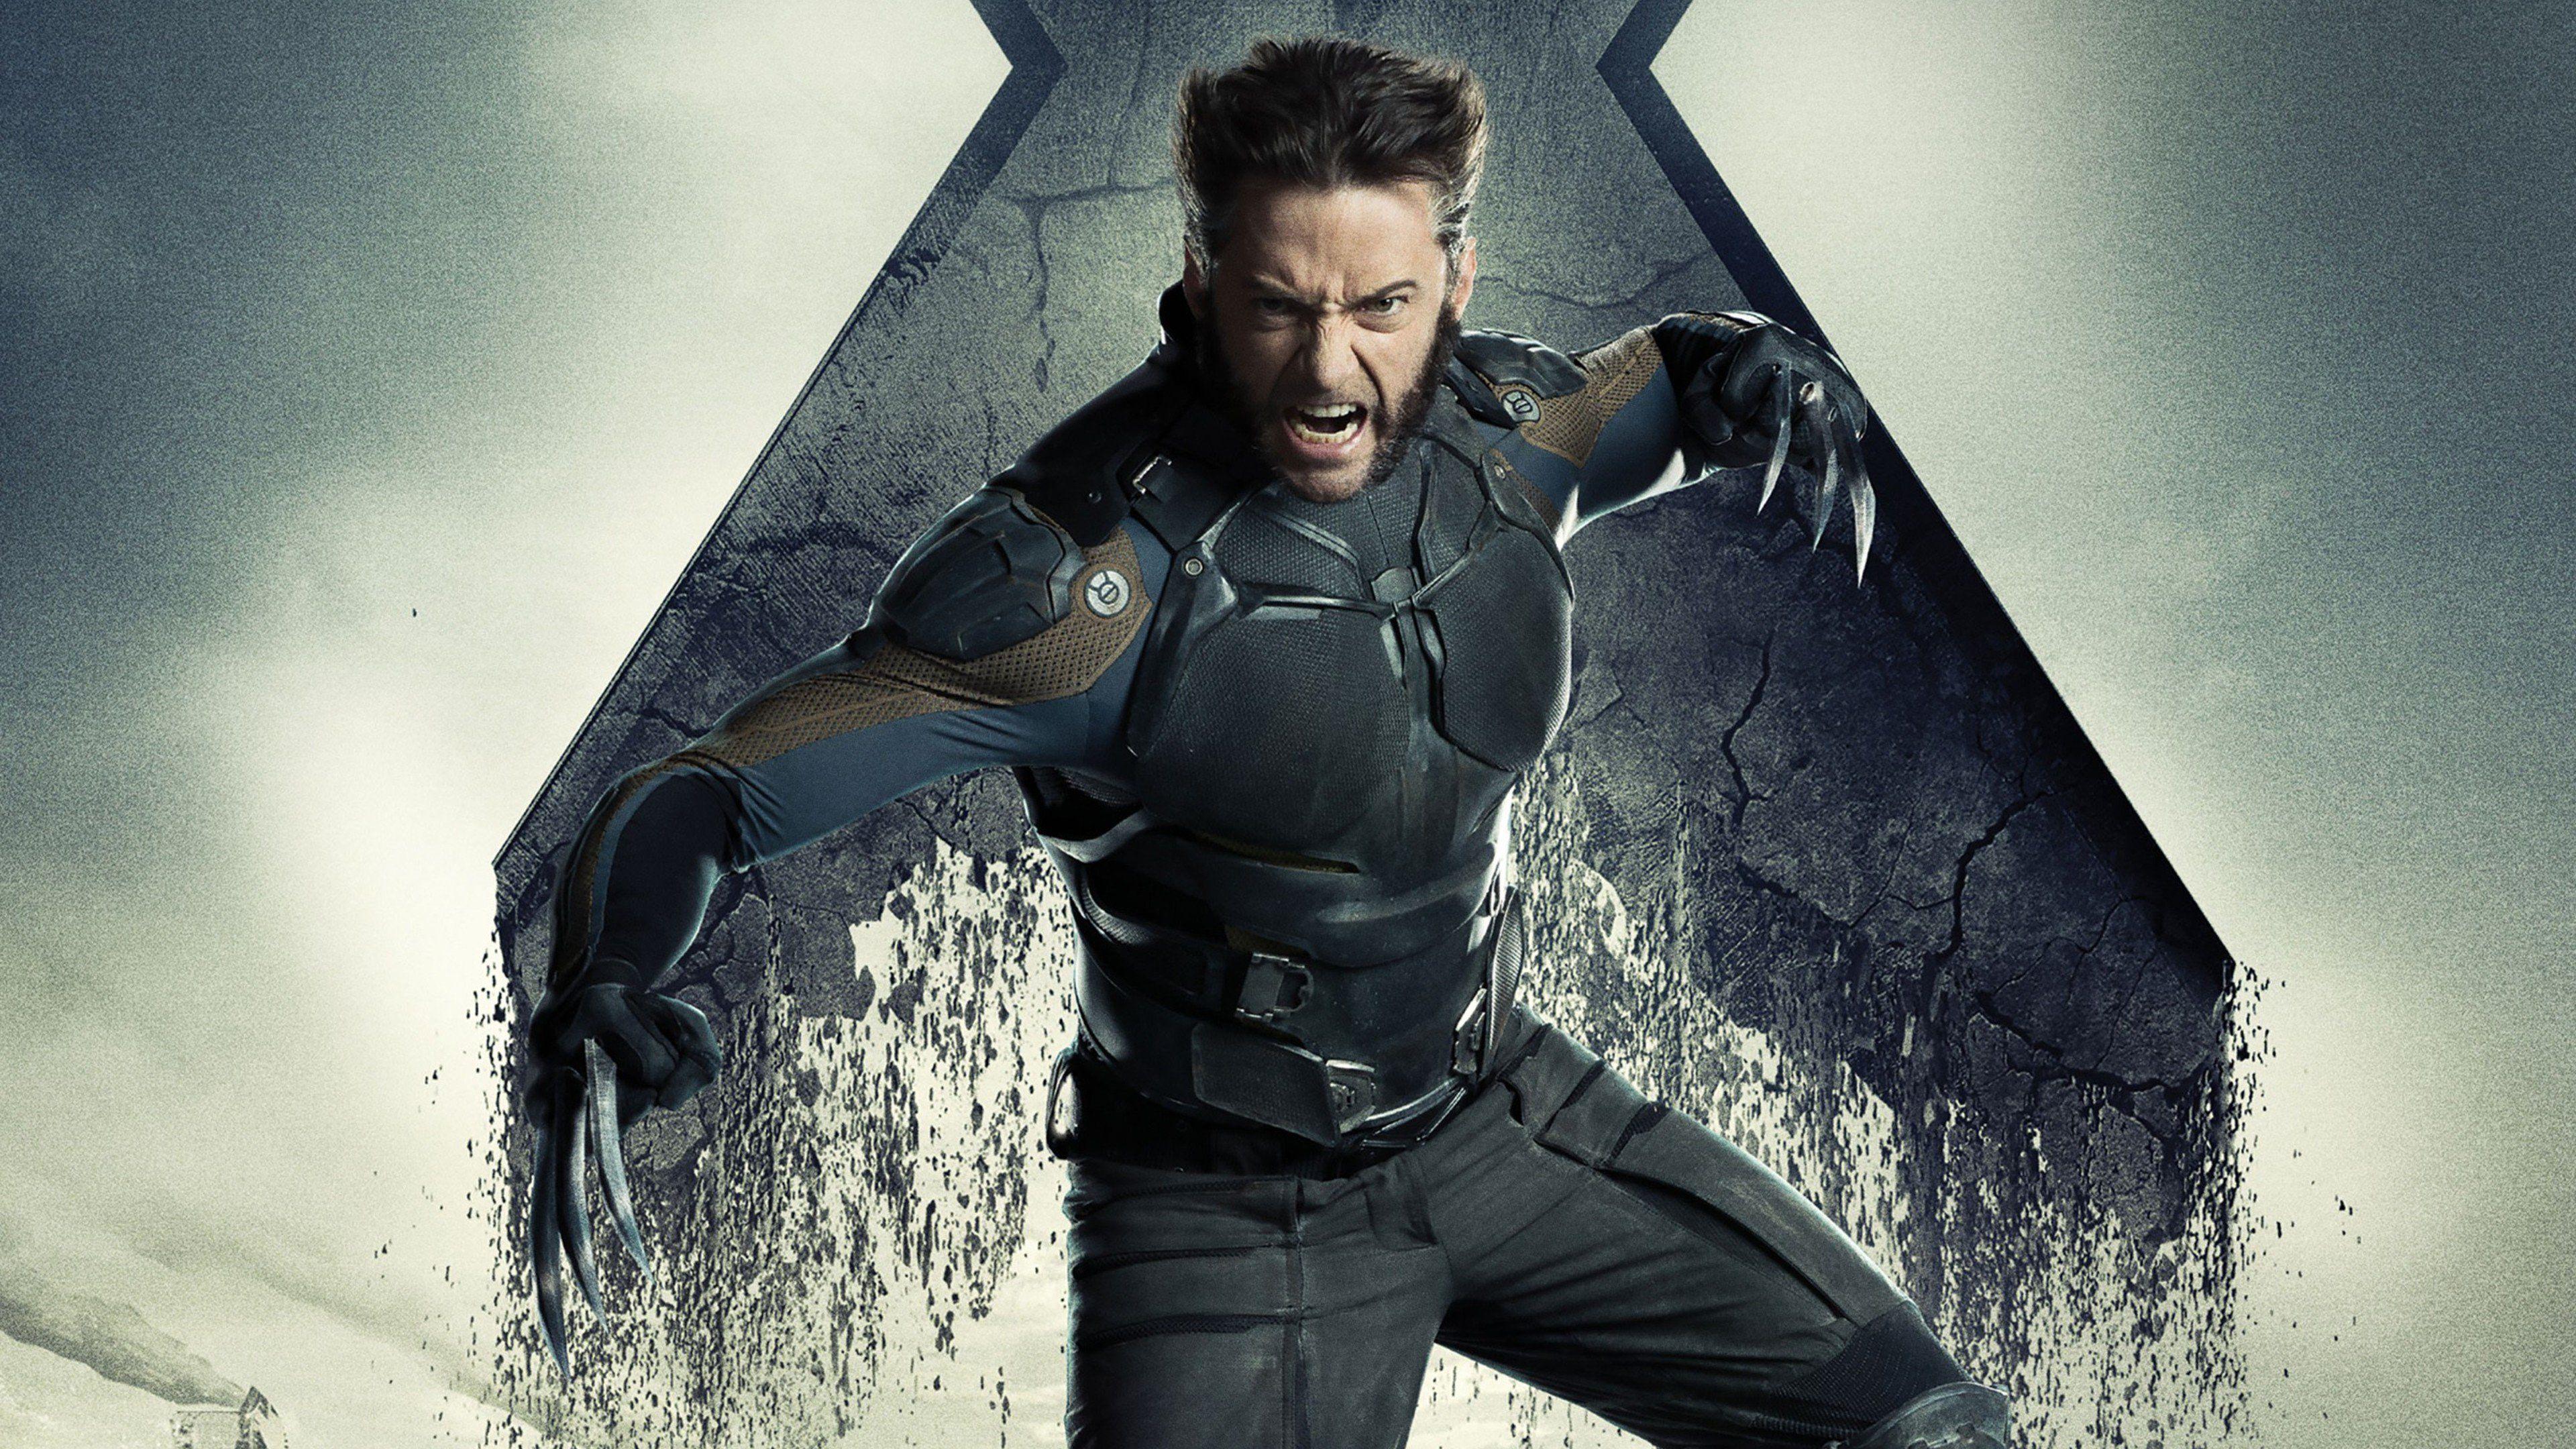 X Men Days Of Future Past High Quality Wallpaper, Movie Wallpaper